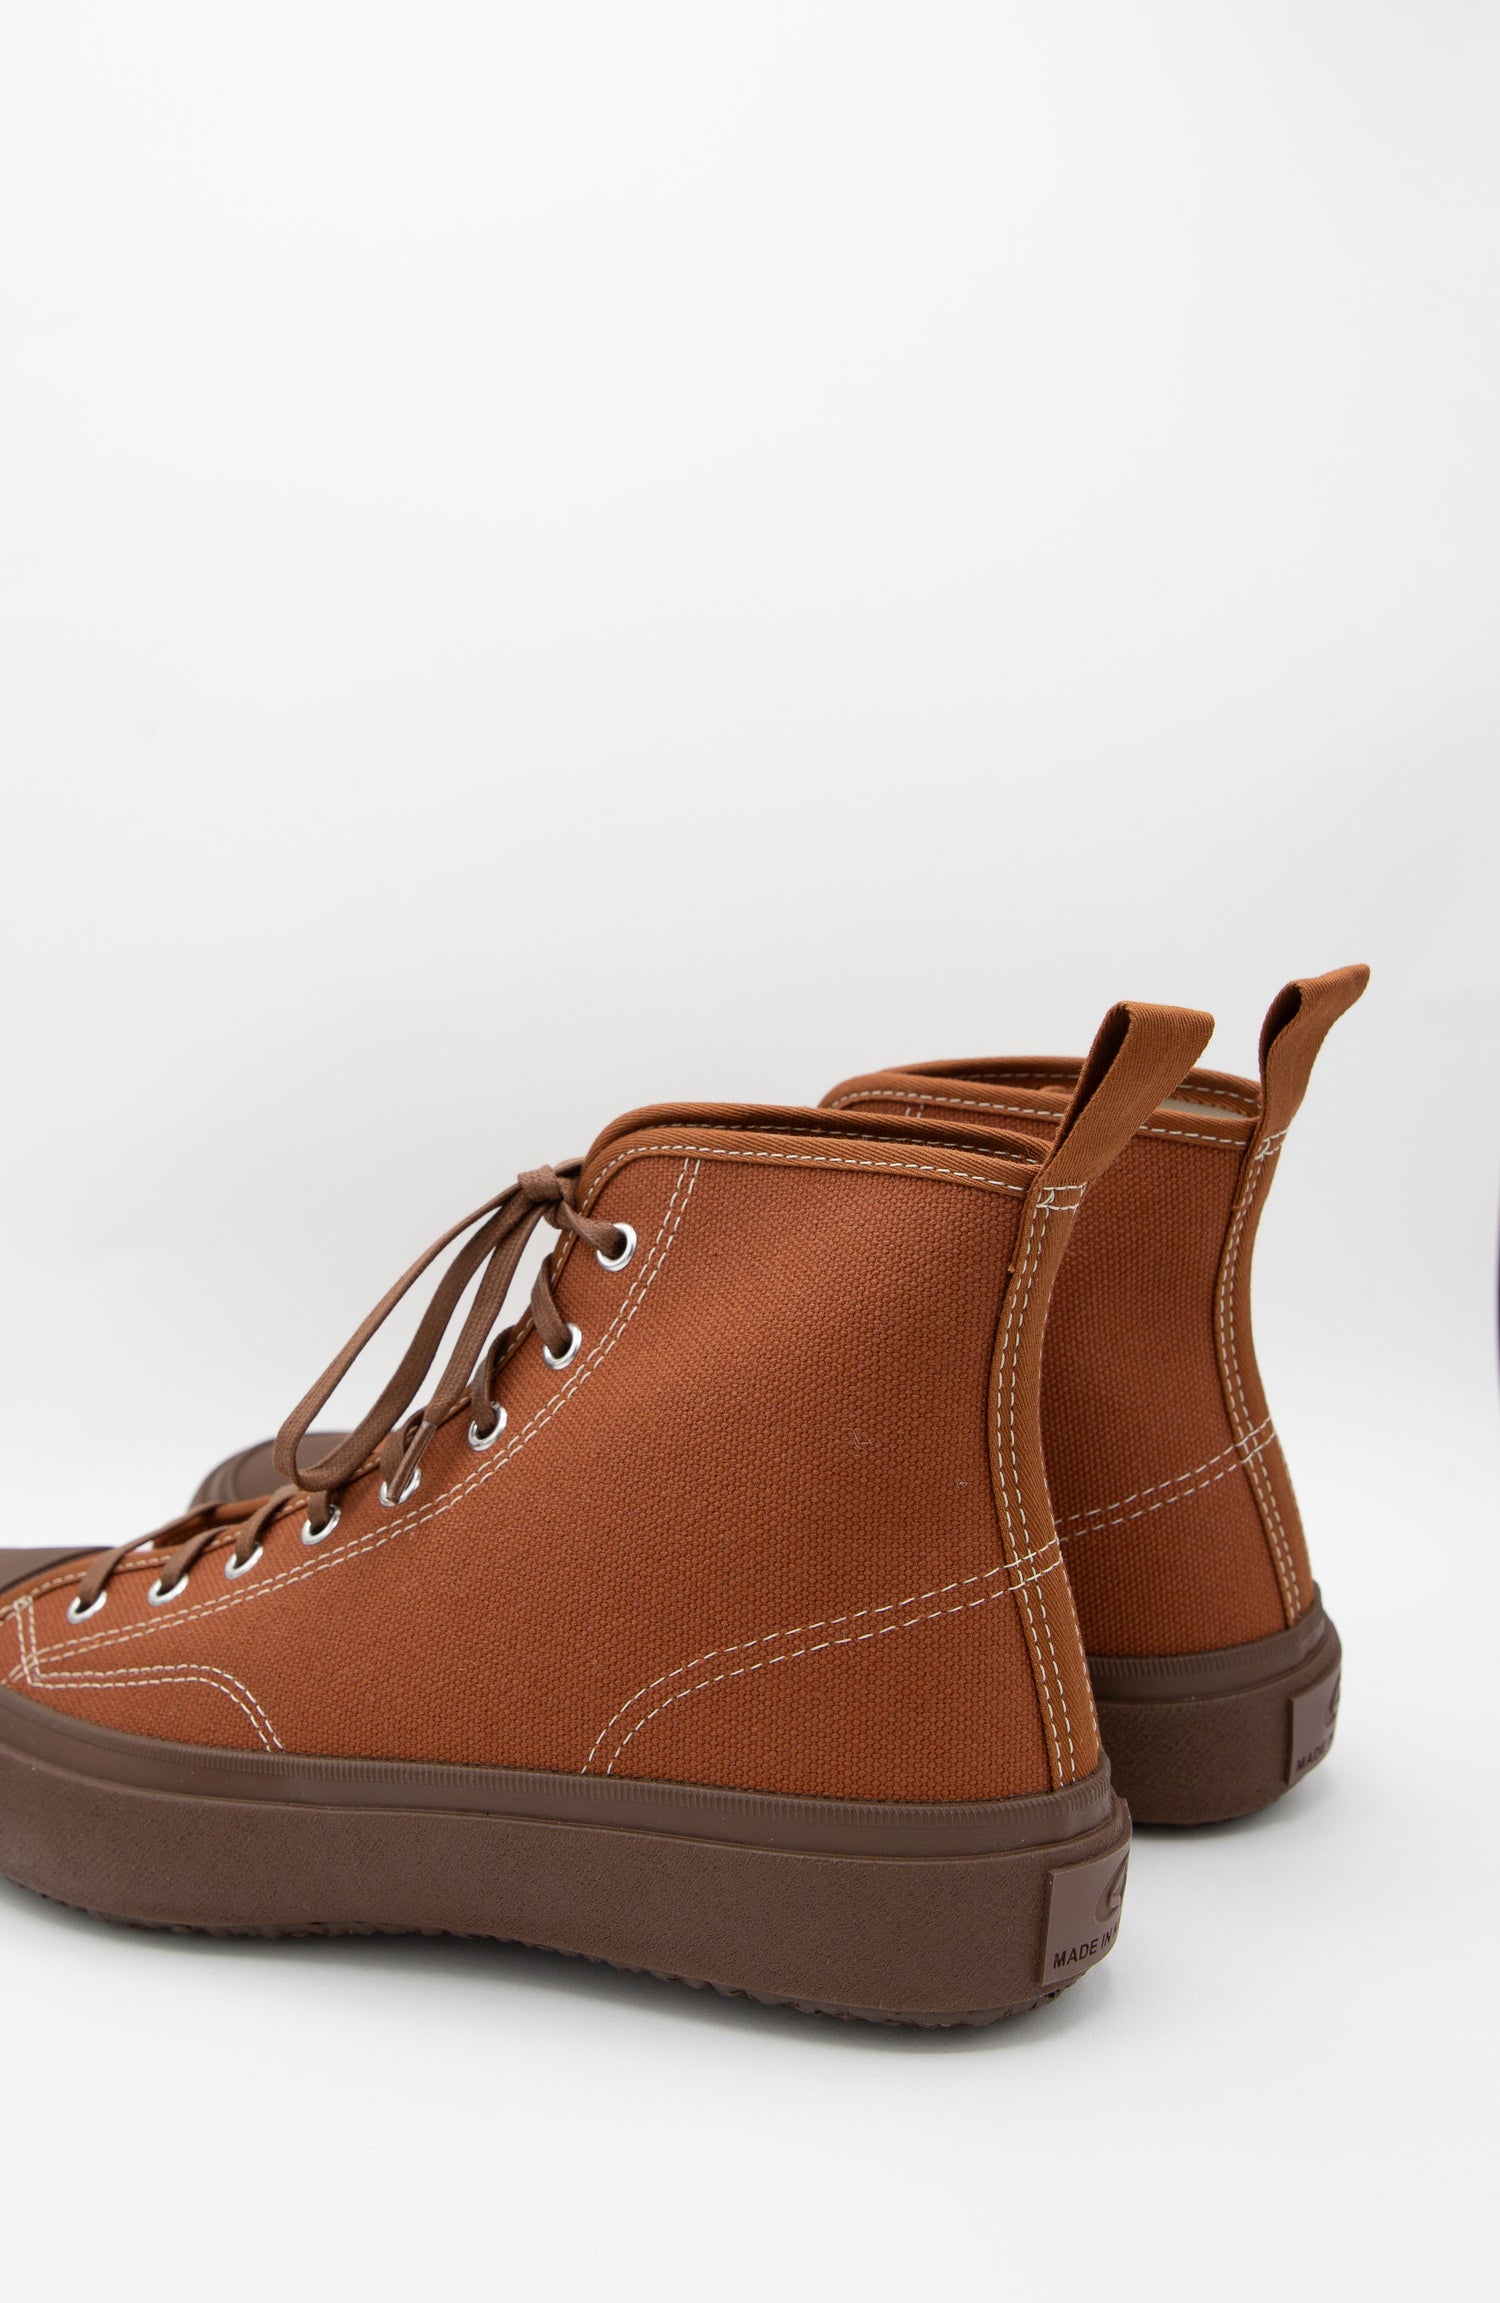 A pair of Moonstar Hibasket Sneakers in Brown with a rubber sole on a white background.